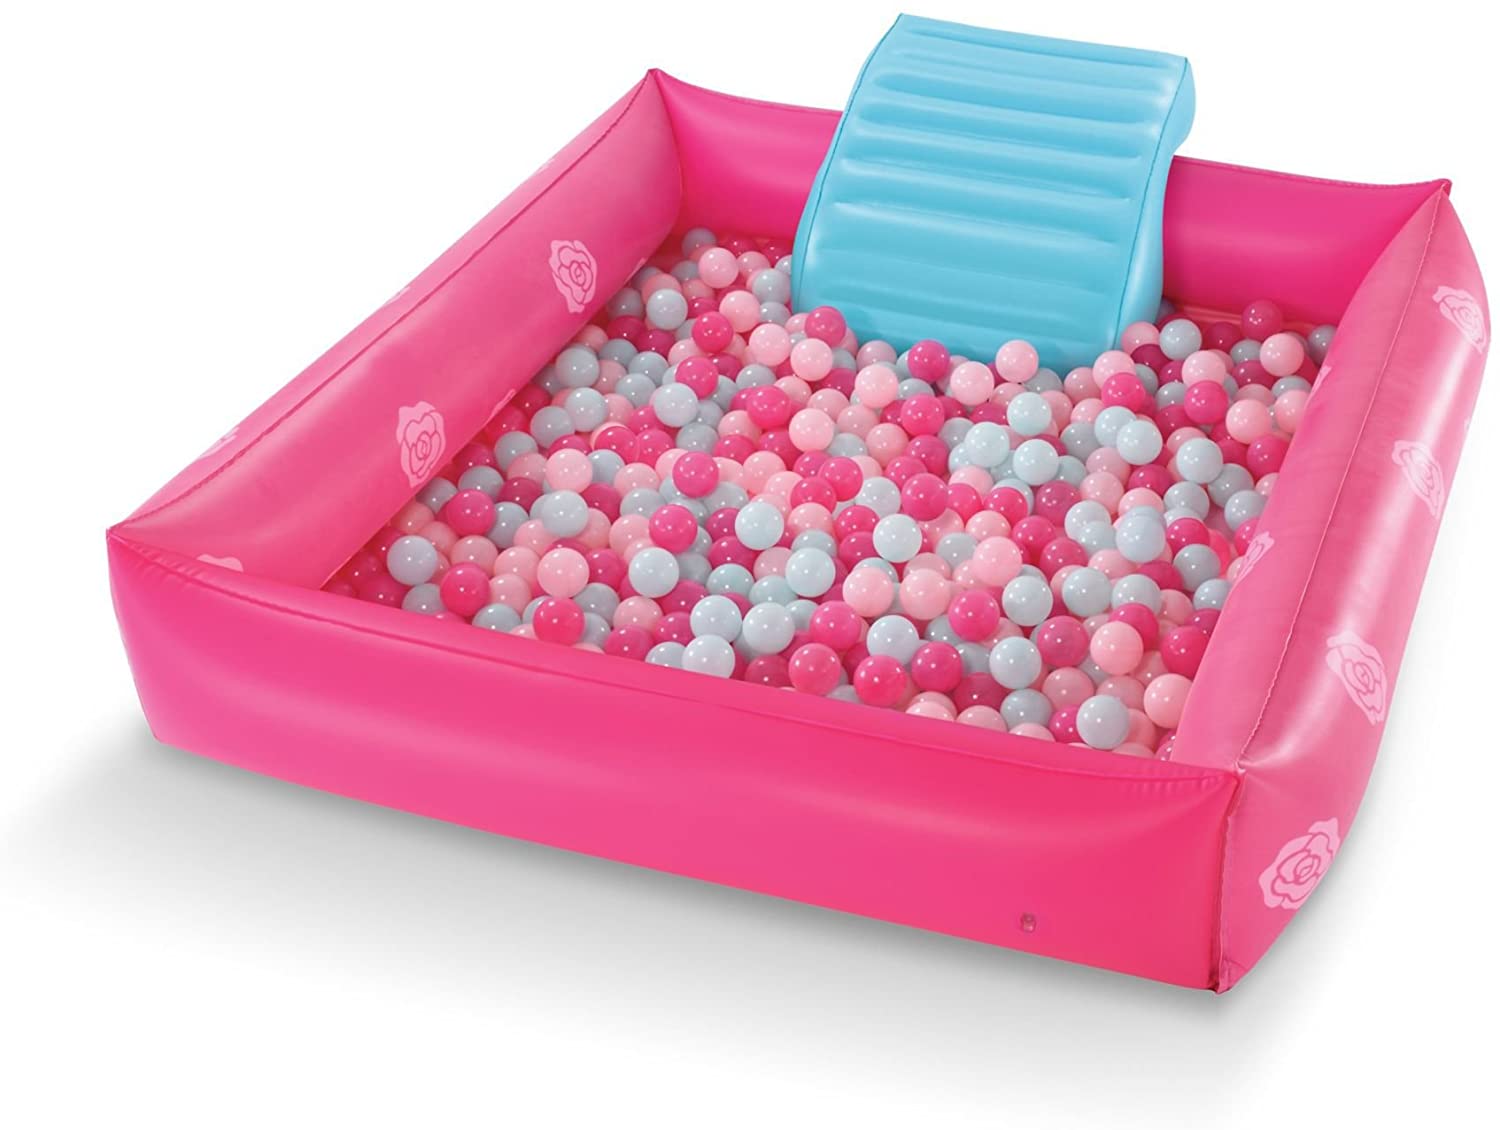 Ball Pit For Bouncy Palace - Baby Ball Pits & Bouncy Castles - ELC